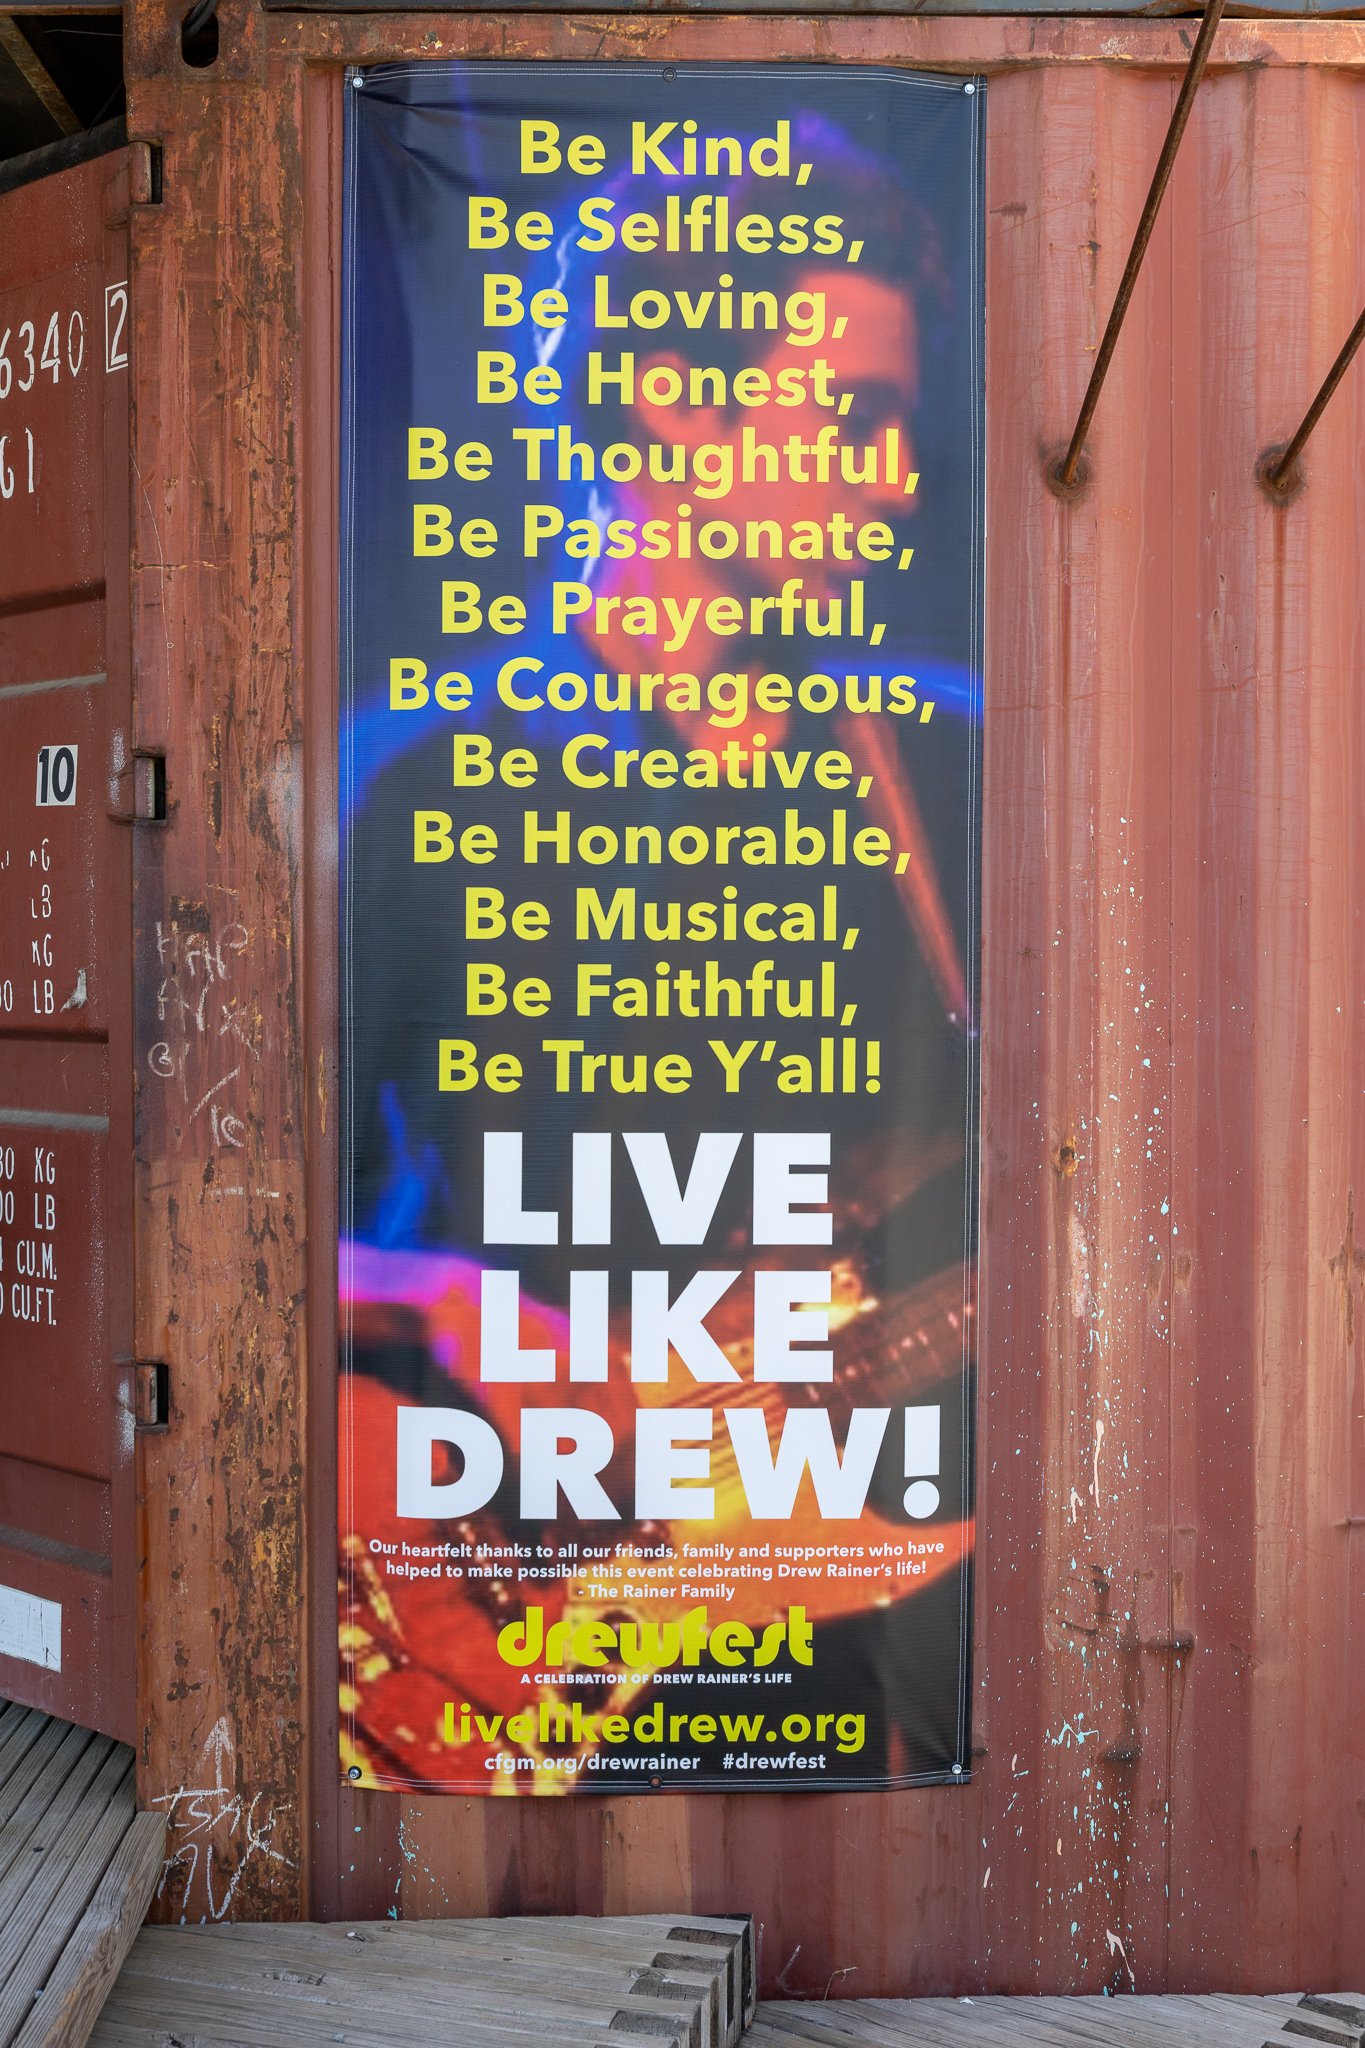  DrewFest Memphis stage banner  Railgarten  Branding creative and design by Chuck Mitchell  Pro bono project celebrating the life of Drew Rainer  Photograph by Bryant Cummings 